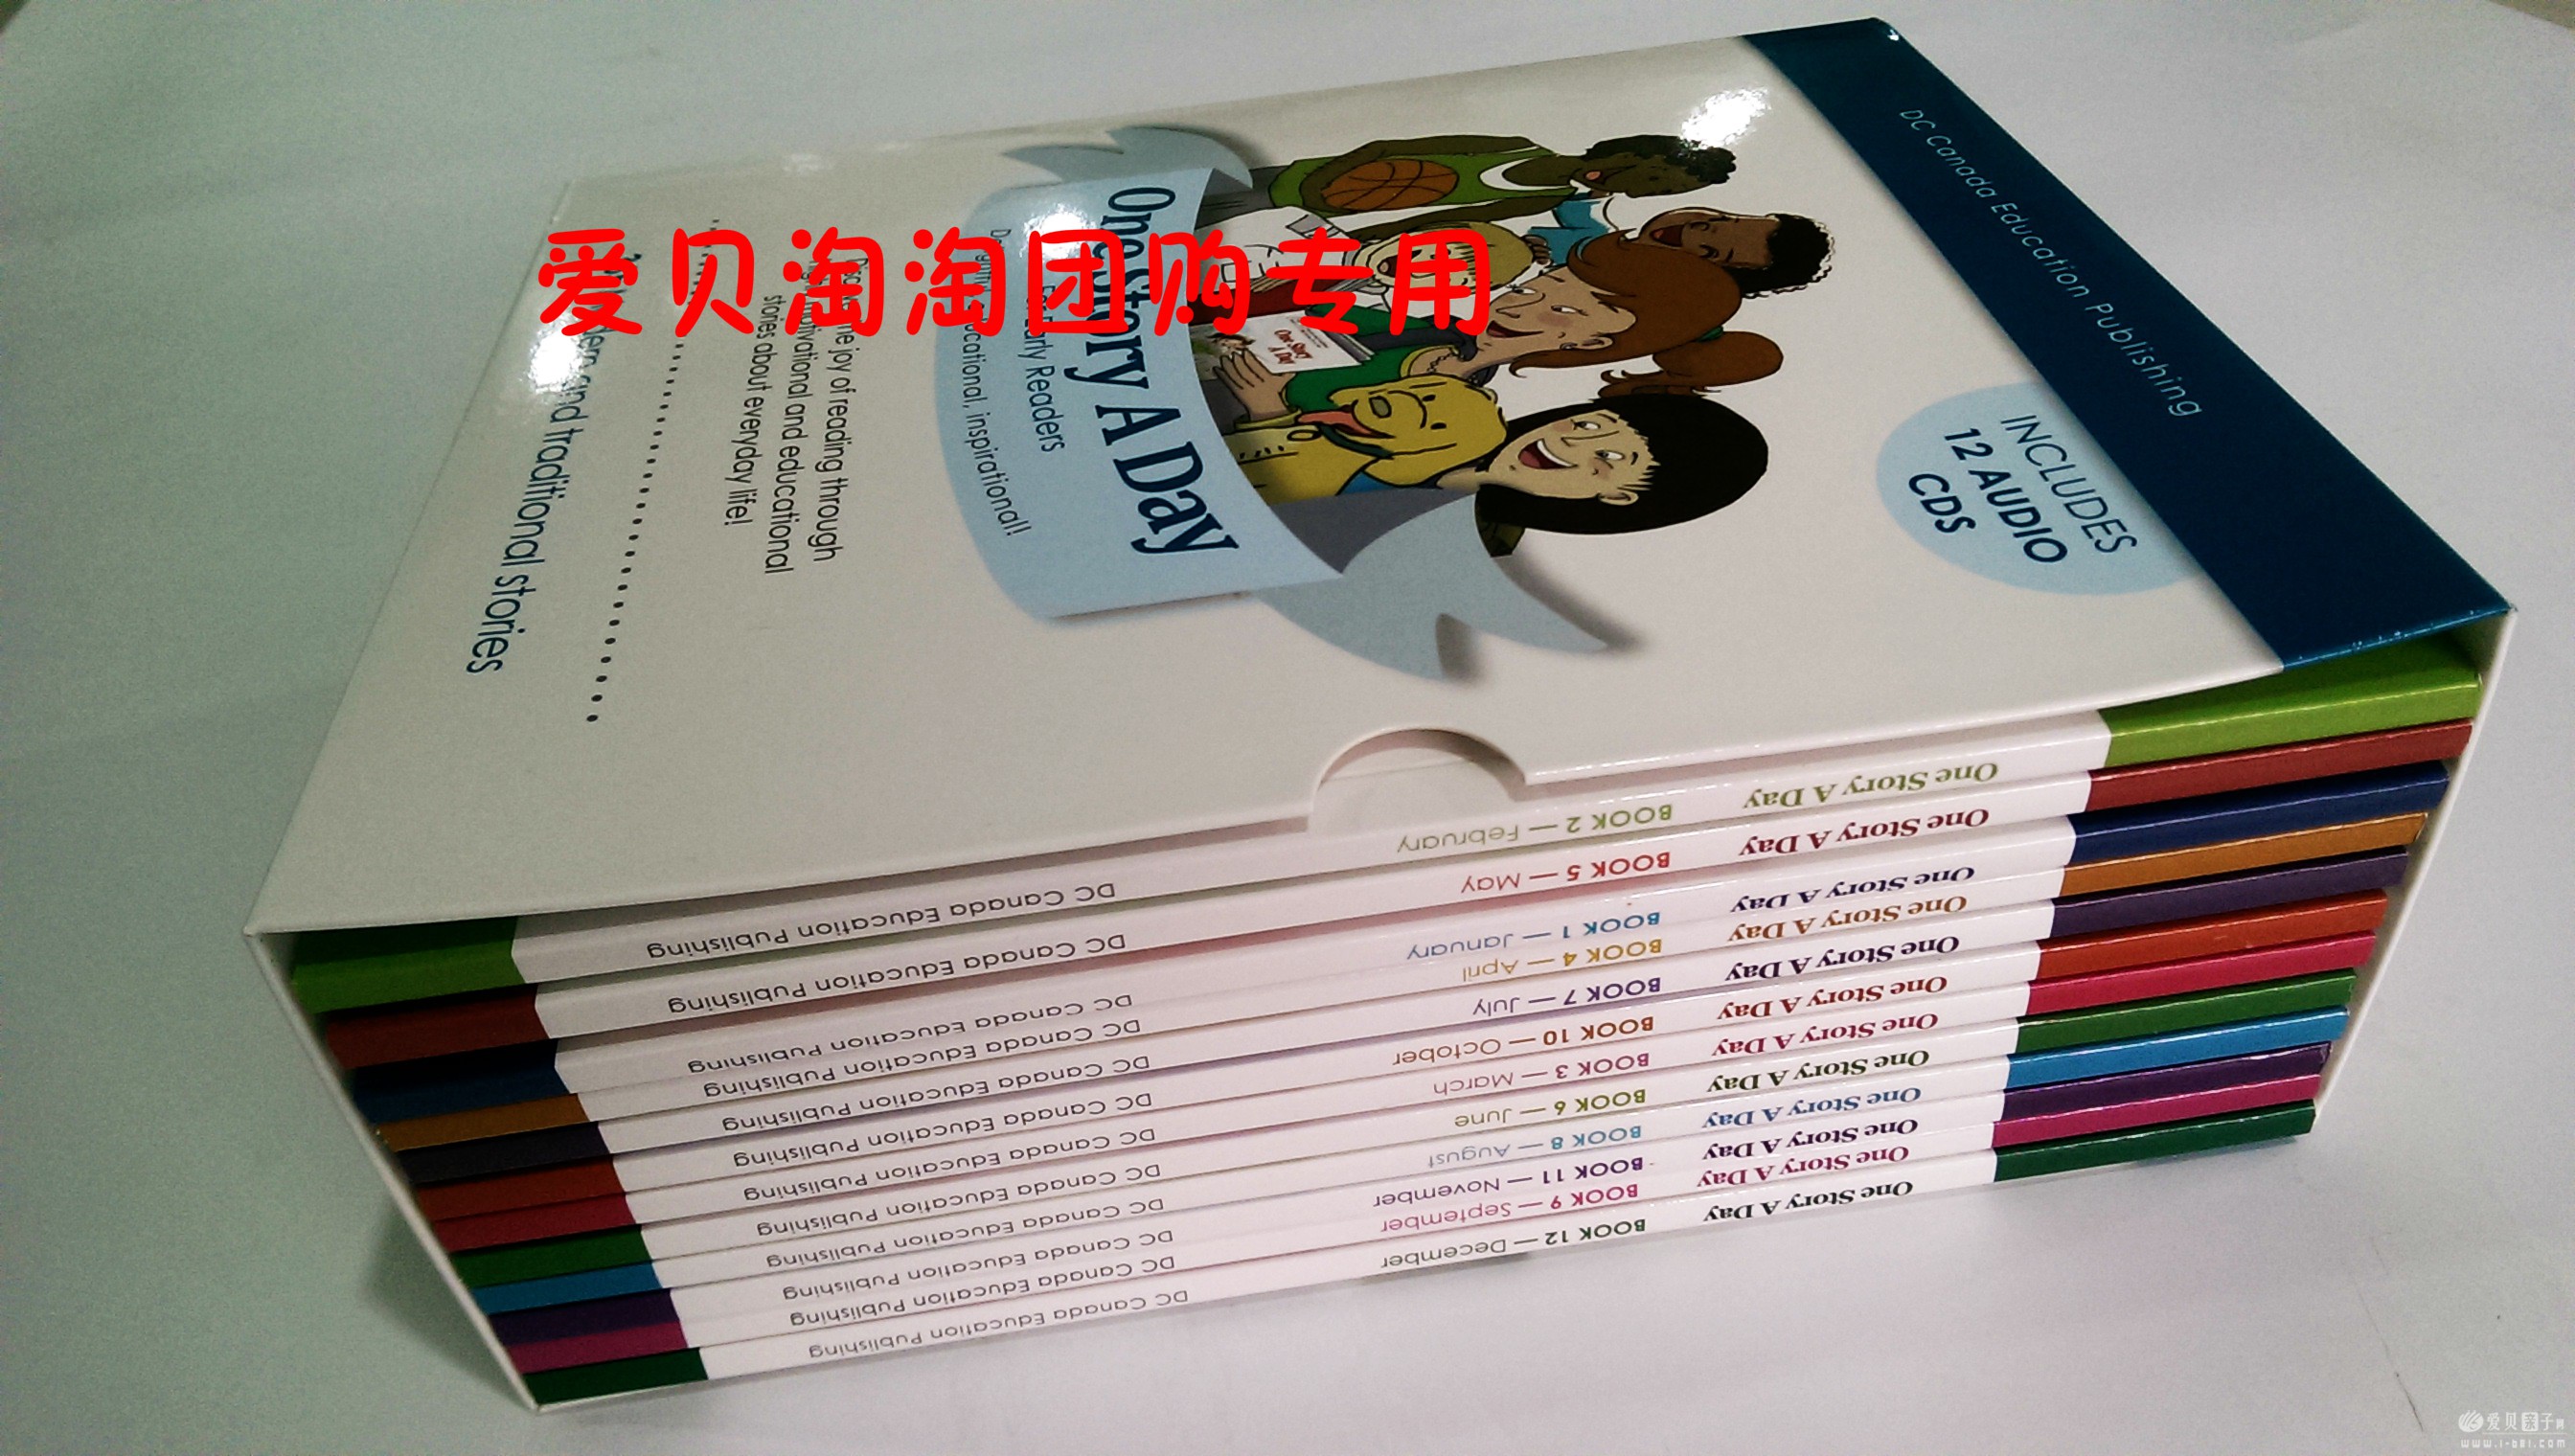 One Story A Day for Early Readers365个故事+12张原版CD